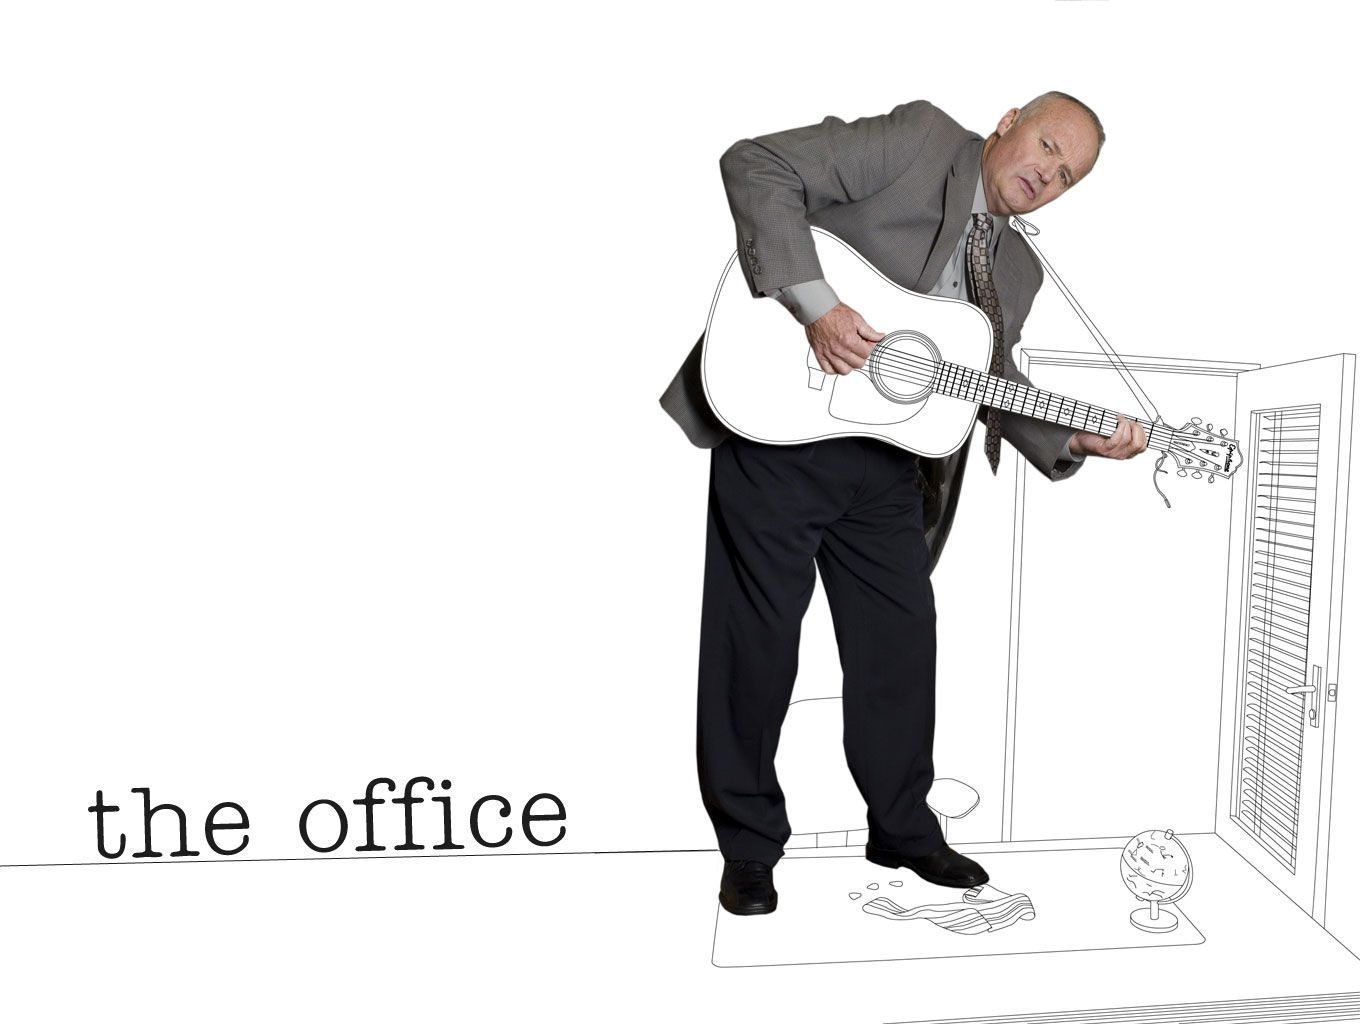 Creed Wallpaper - The Office Photo (370518) - Fanpop